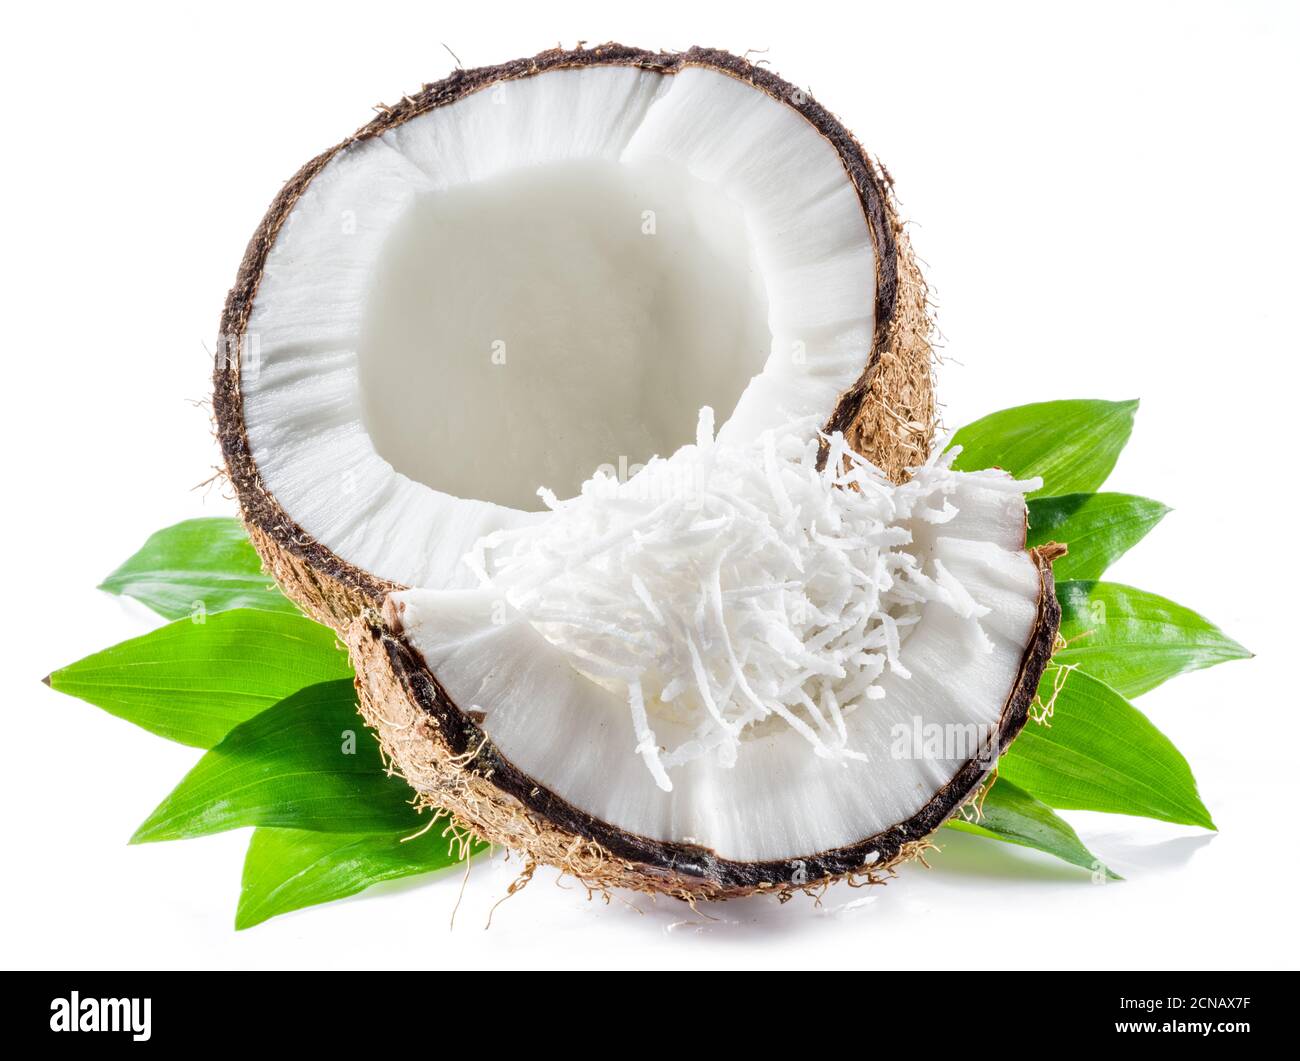 Cracked coconut fruit with white flesh and shredded coconut flakes isolated on white background. Stock Photo